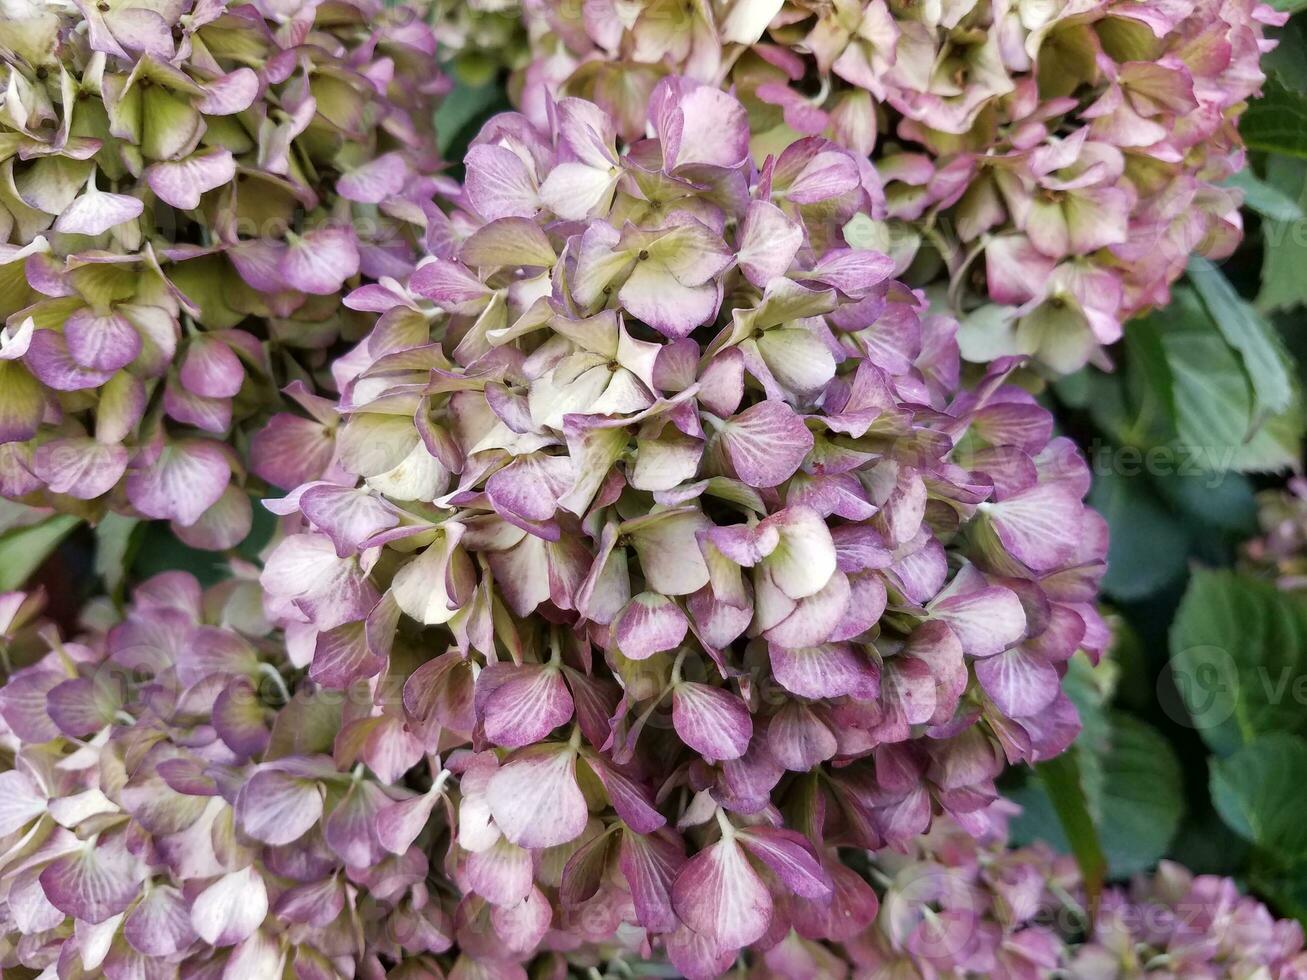 hydrangea plant with pink flowers and green leaves photo